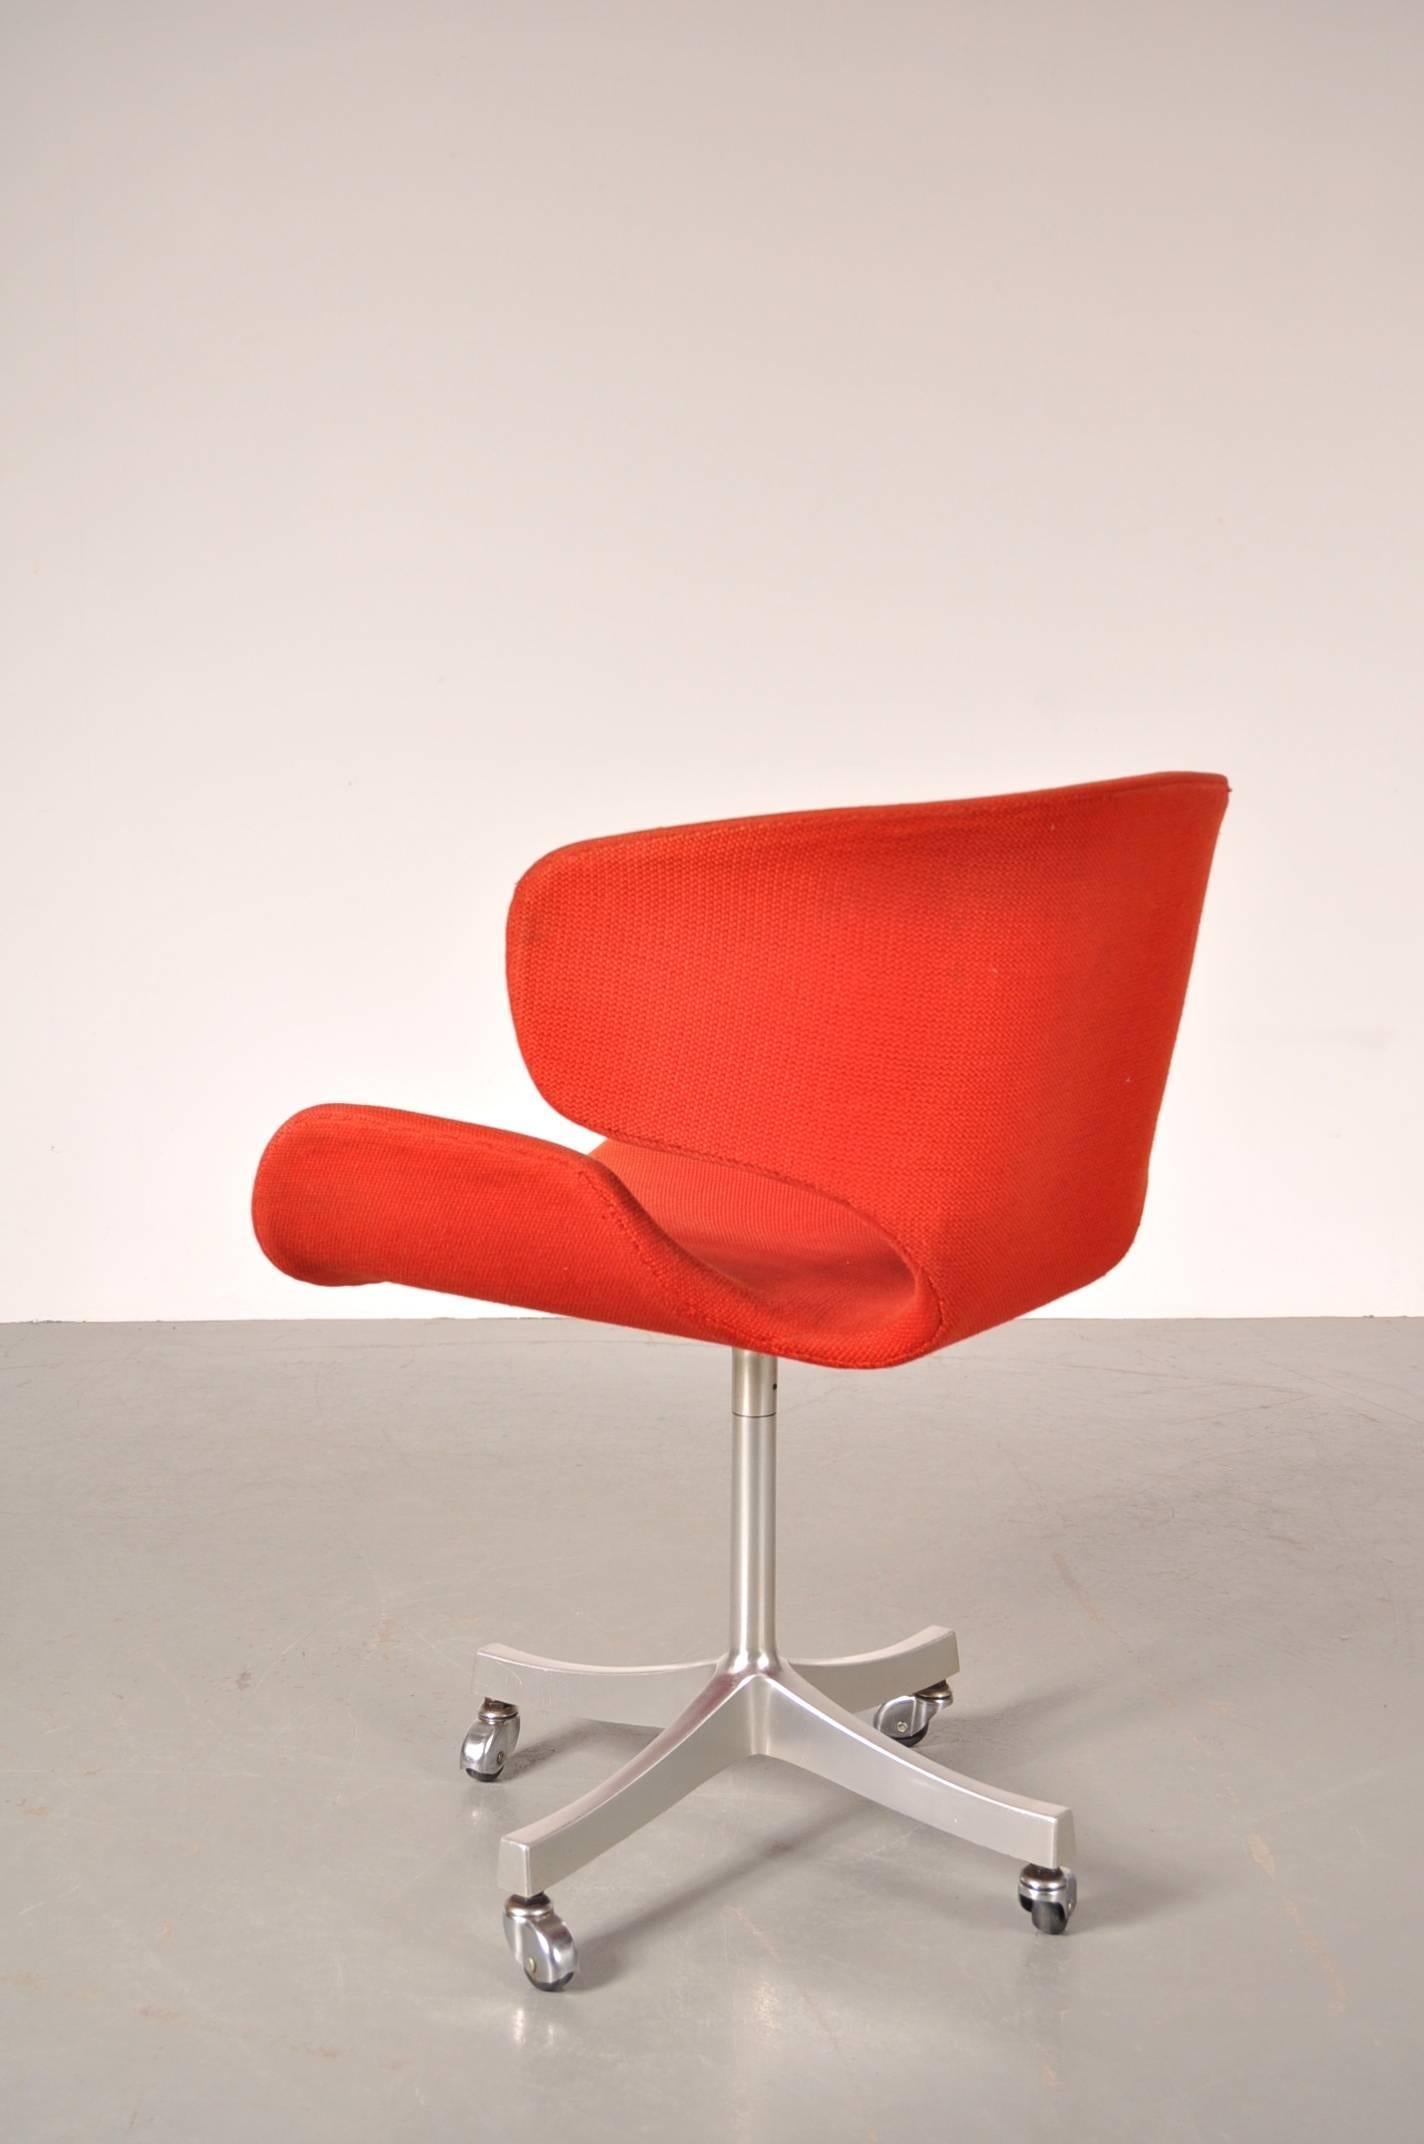 Kabuto Office Chair by Isamu Kenmochi for Tendo, Japan, 1961 1